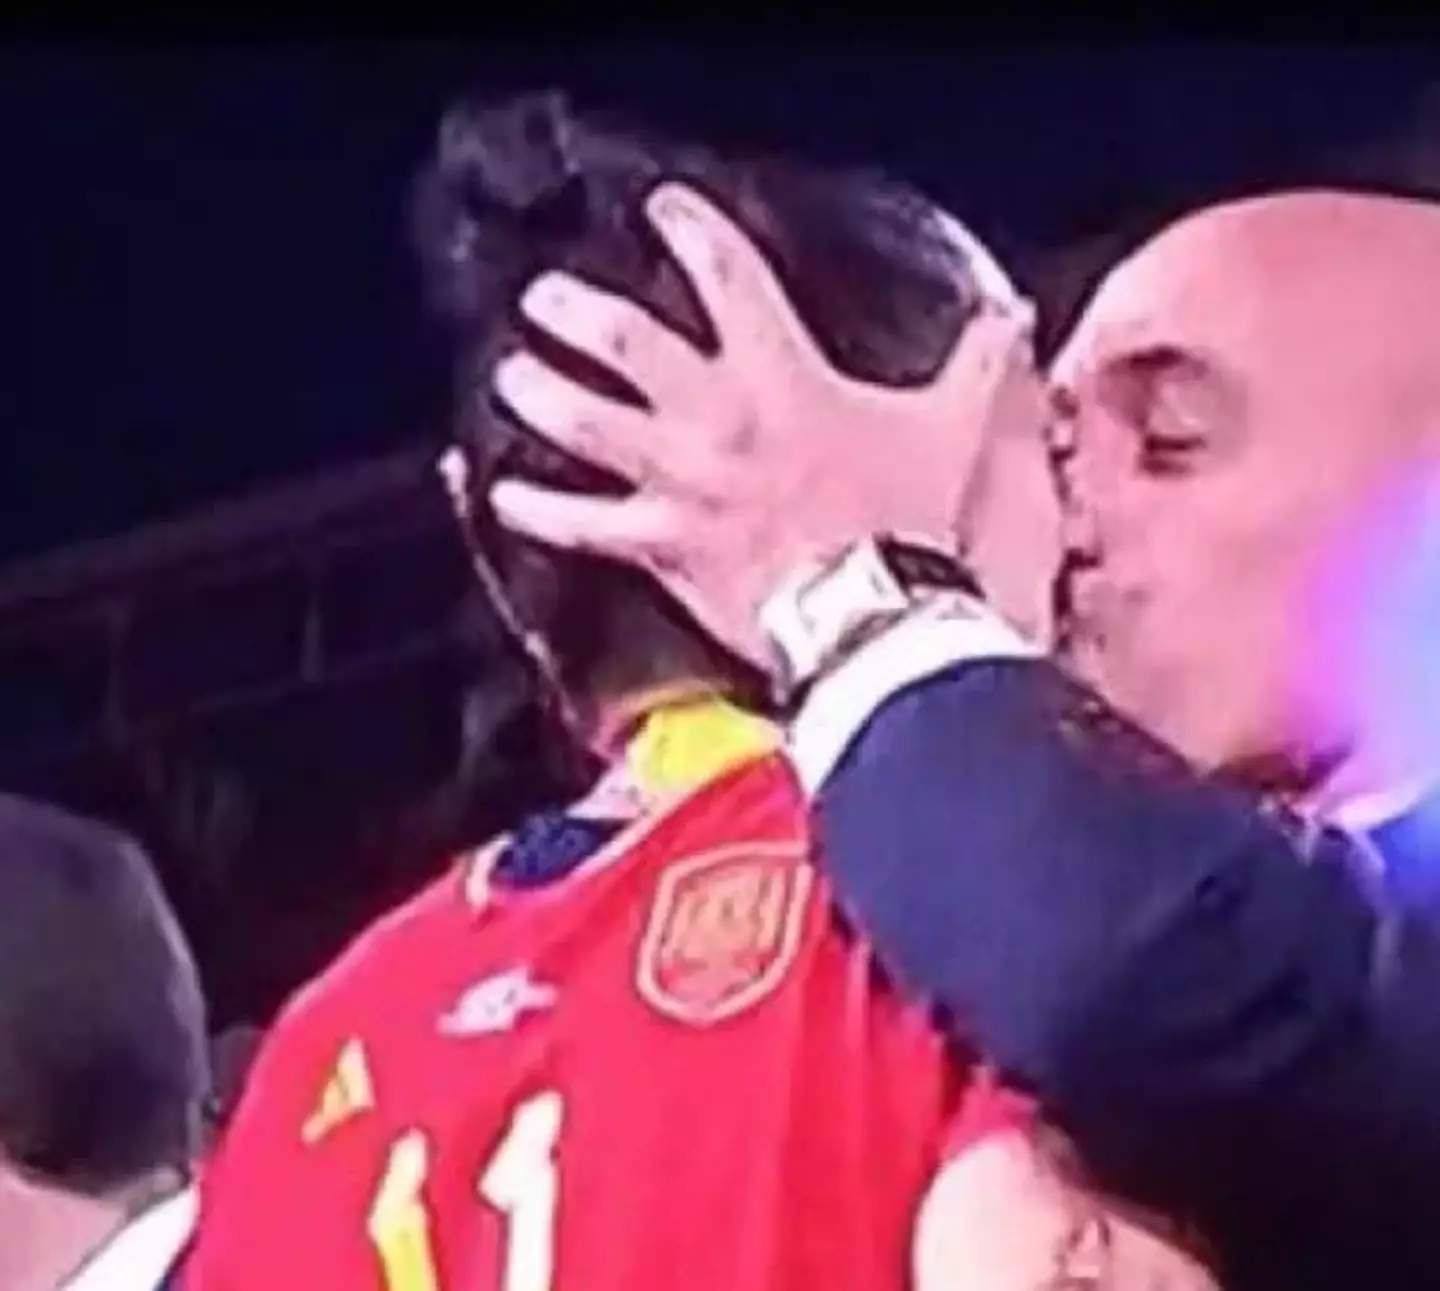 Rubiales kissed Hermoso on the lips.